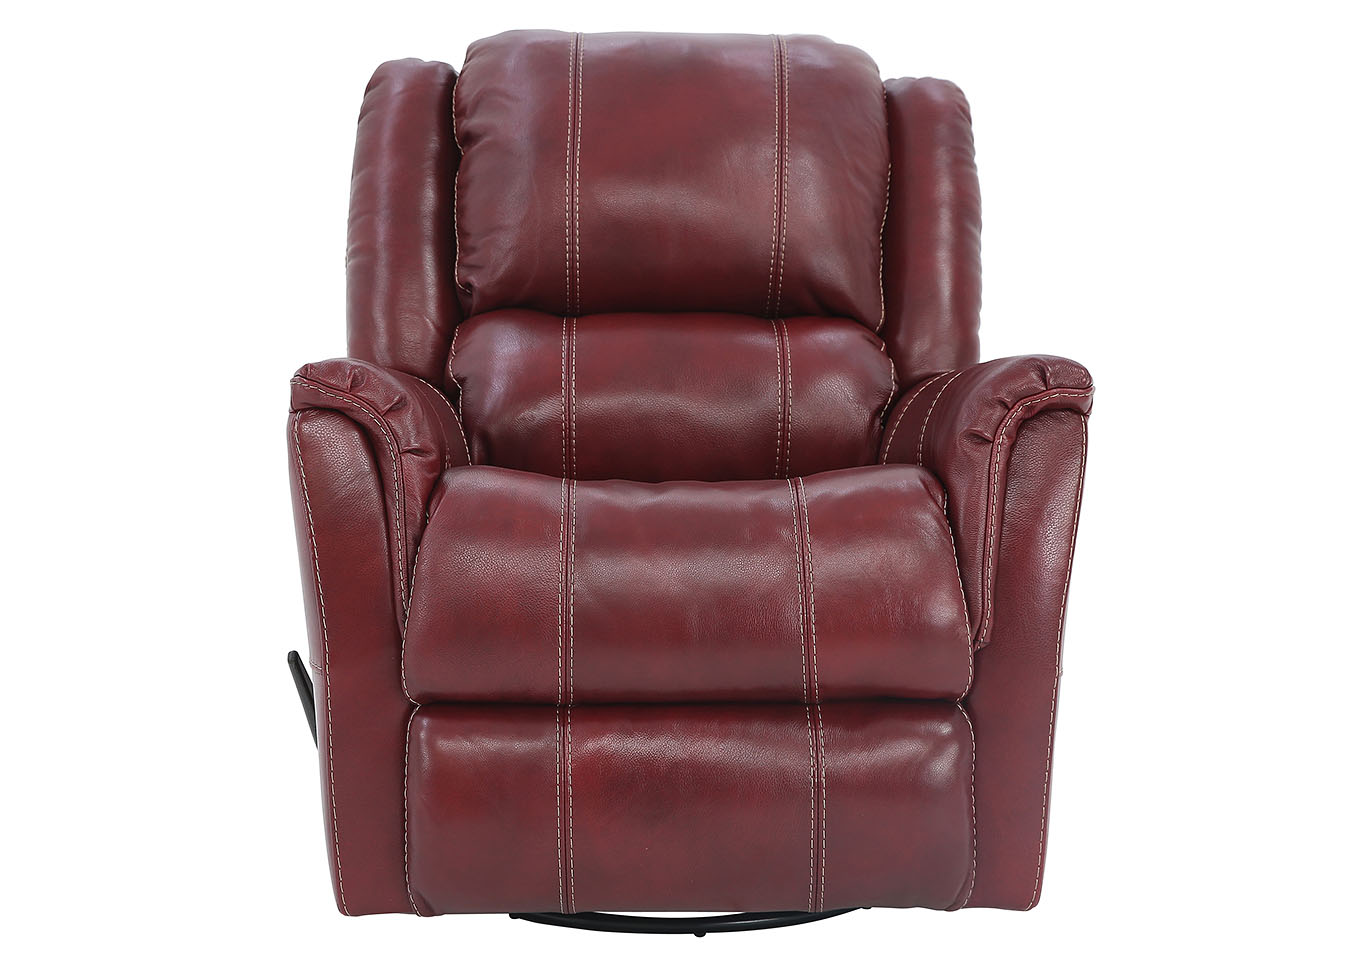 Bryce Red Leather Swivel Glider, Leather Recliner Swivel